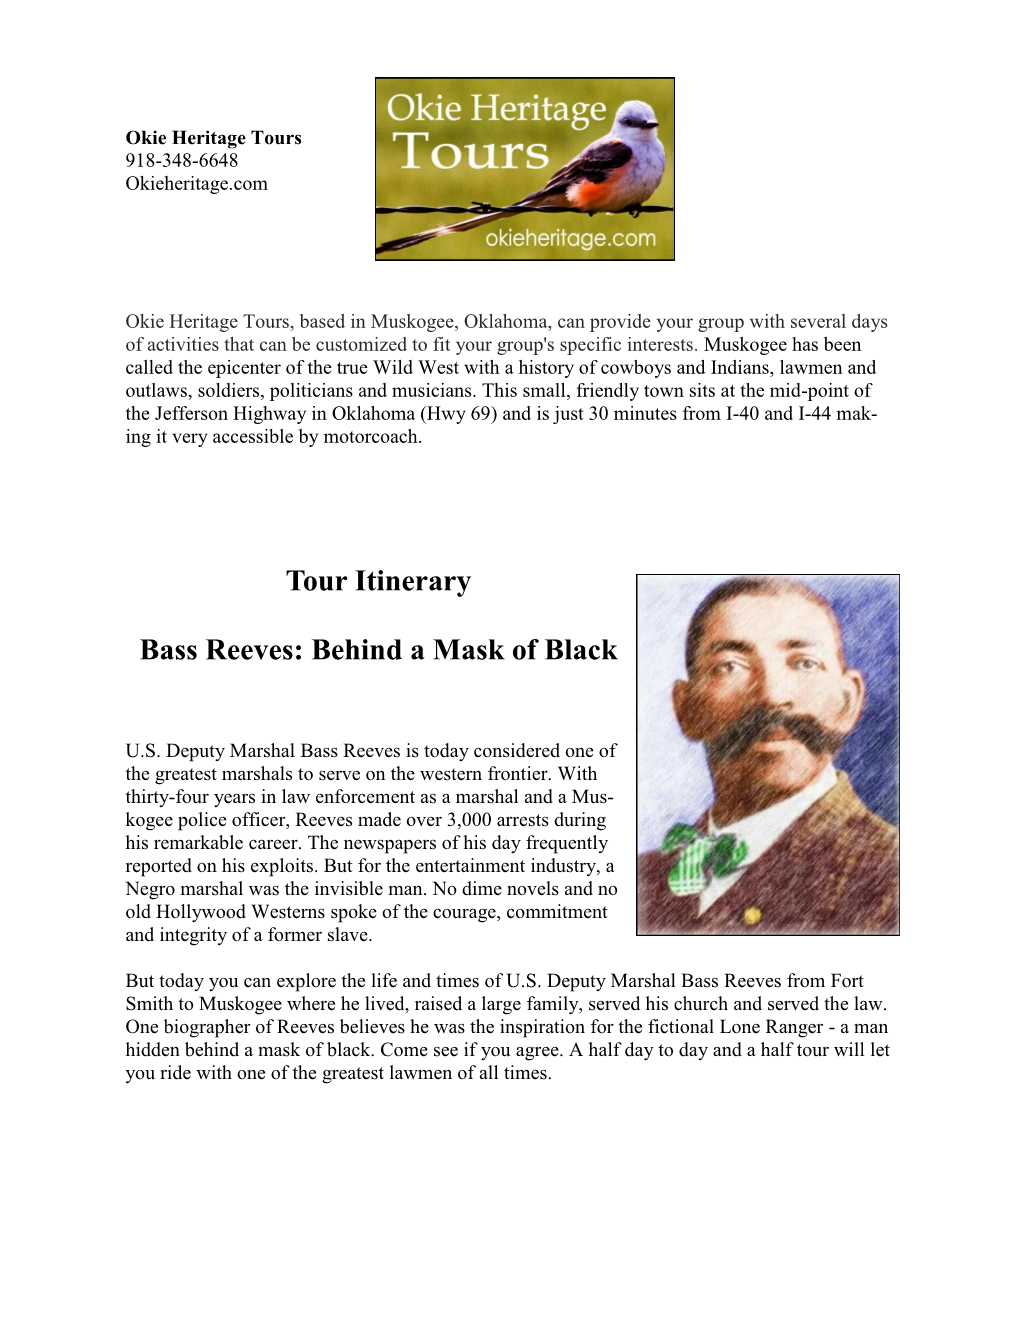 Tour Itinerary Bass Reeves: Behind a Mask of Black